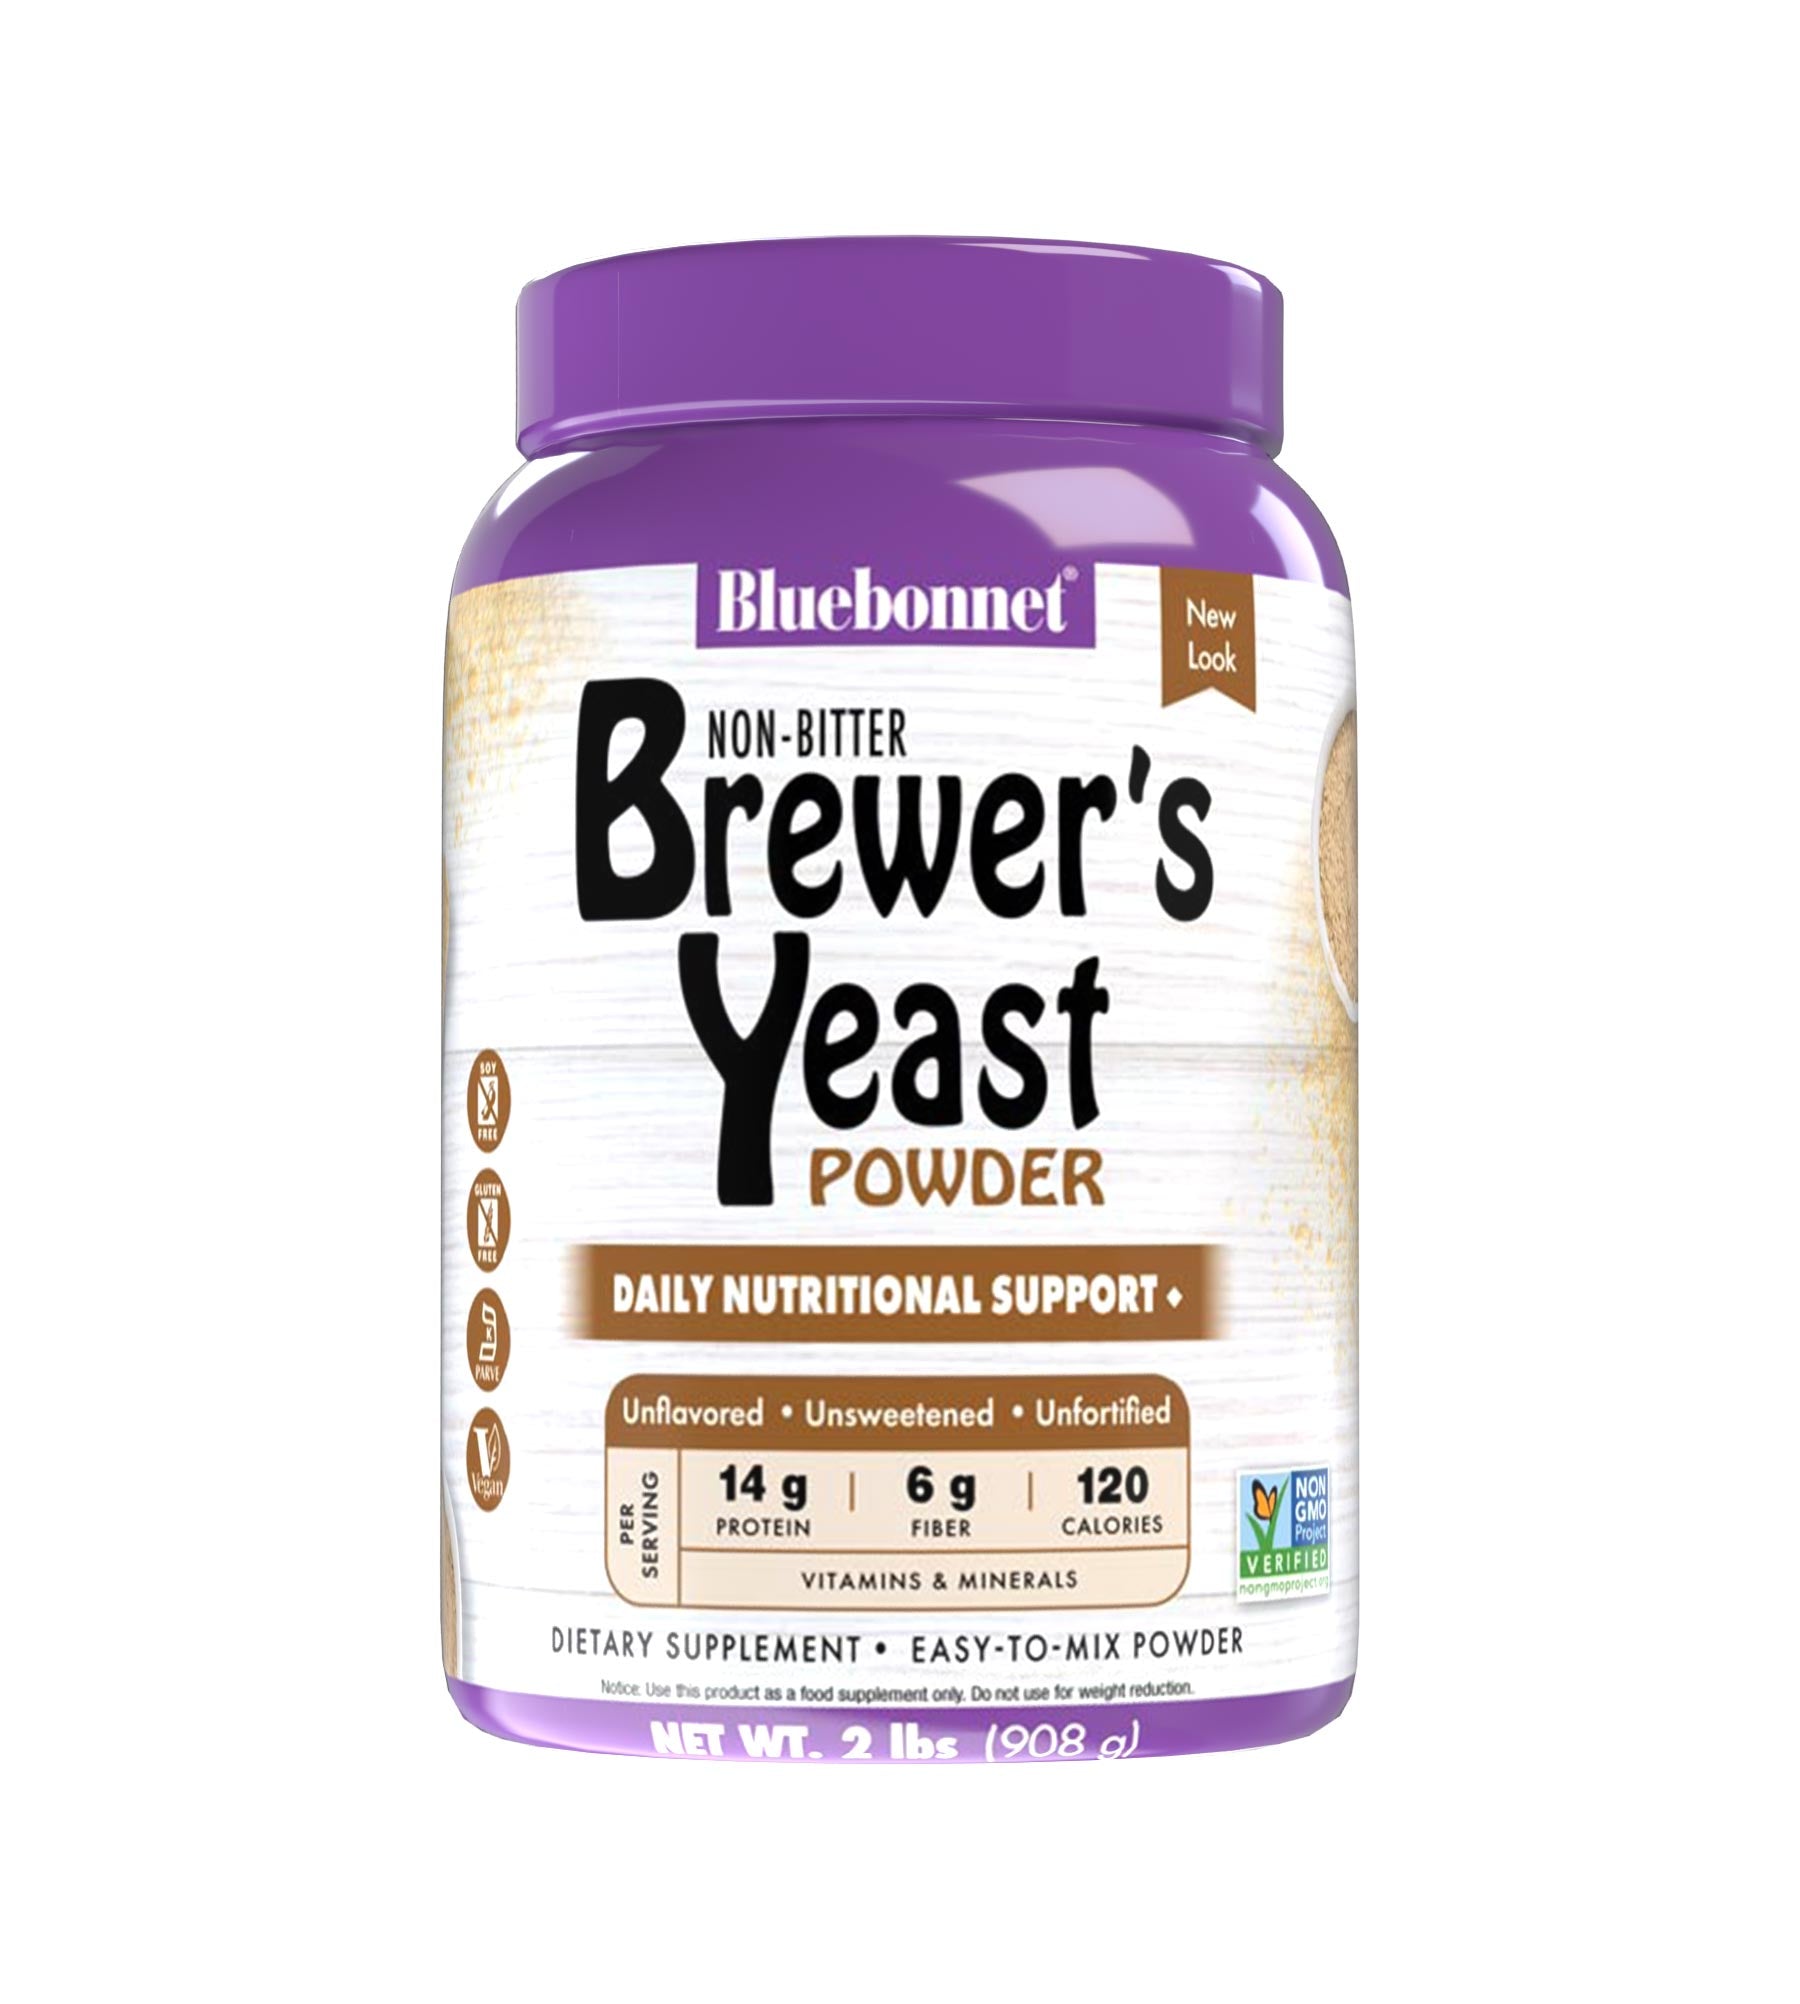 Bluebonnet’s Super Earth® Brewer’s Yeast Powder is formulated with a select strain of Saccharomyces cerevisiae that is carefully grown on certified non-GMO sugar beet molasses instead of the typical grain-derived brewer’s yeast that is recovered from the beer-brewing process.  #size_2 lb